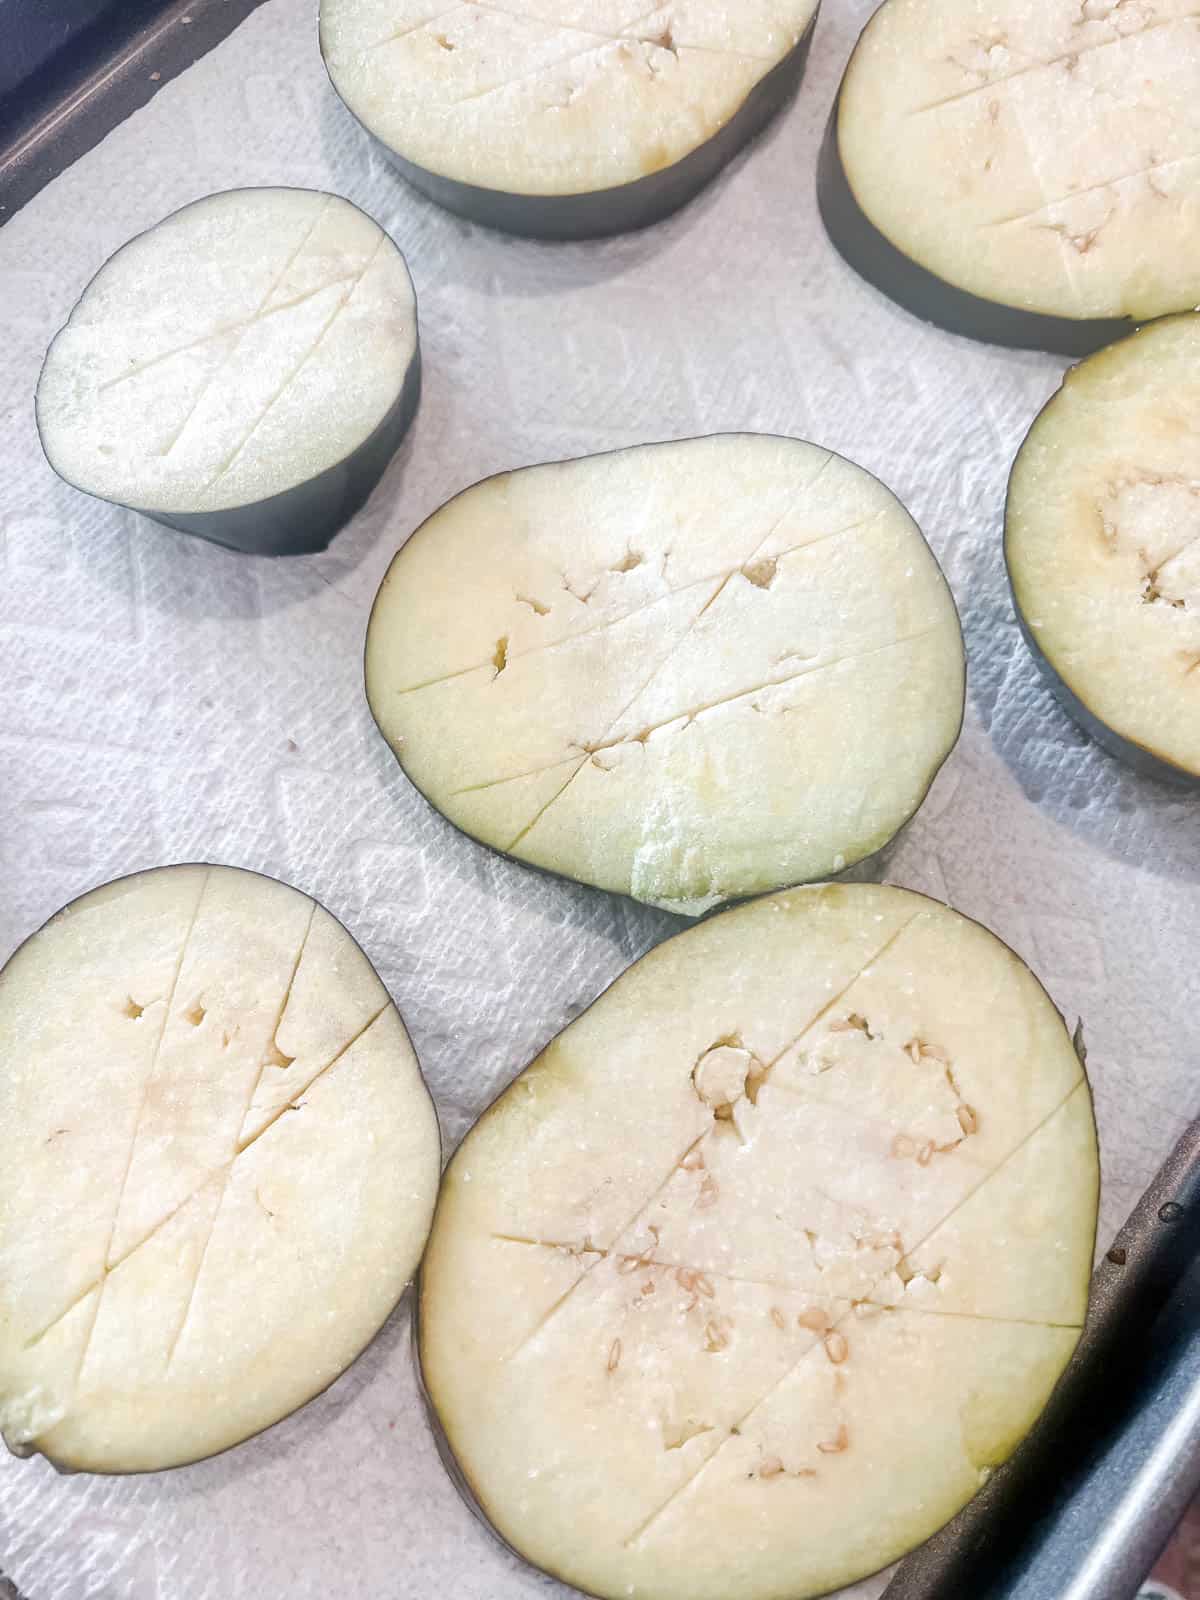 The eggplant with salt on top to remove excess moisture.